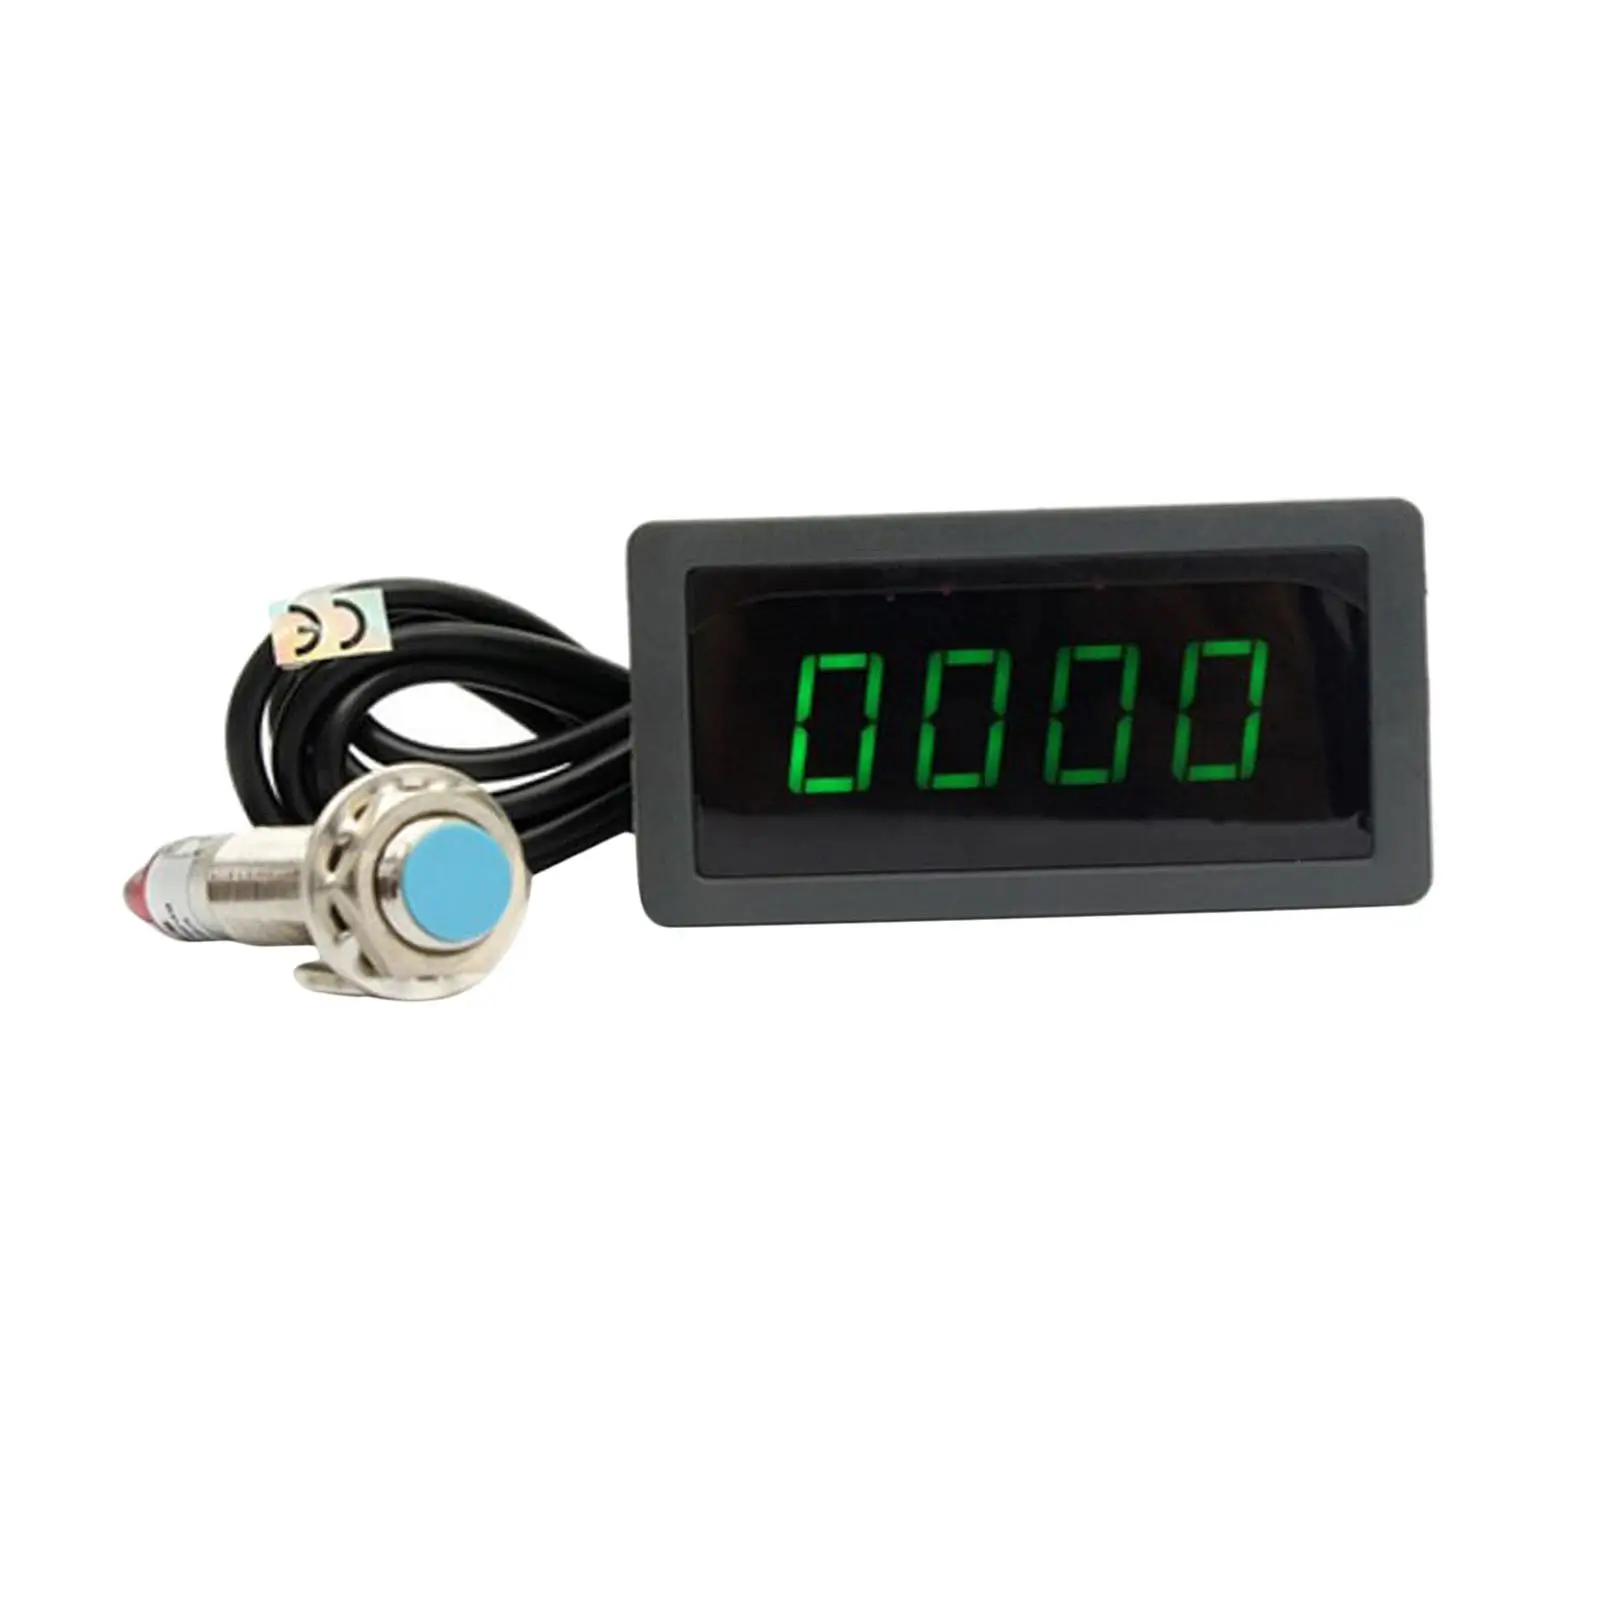 Compact Digital Tachometer RPM Meter LED Tachometer RPM Speed Meter with Switch